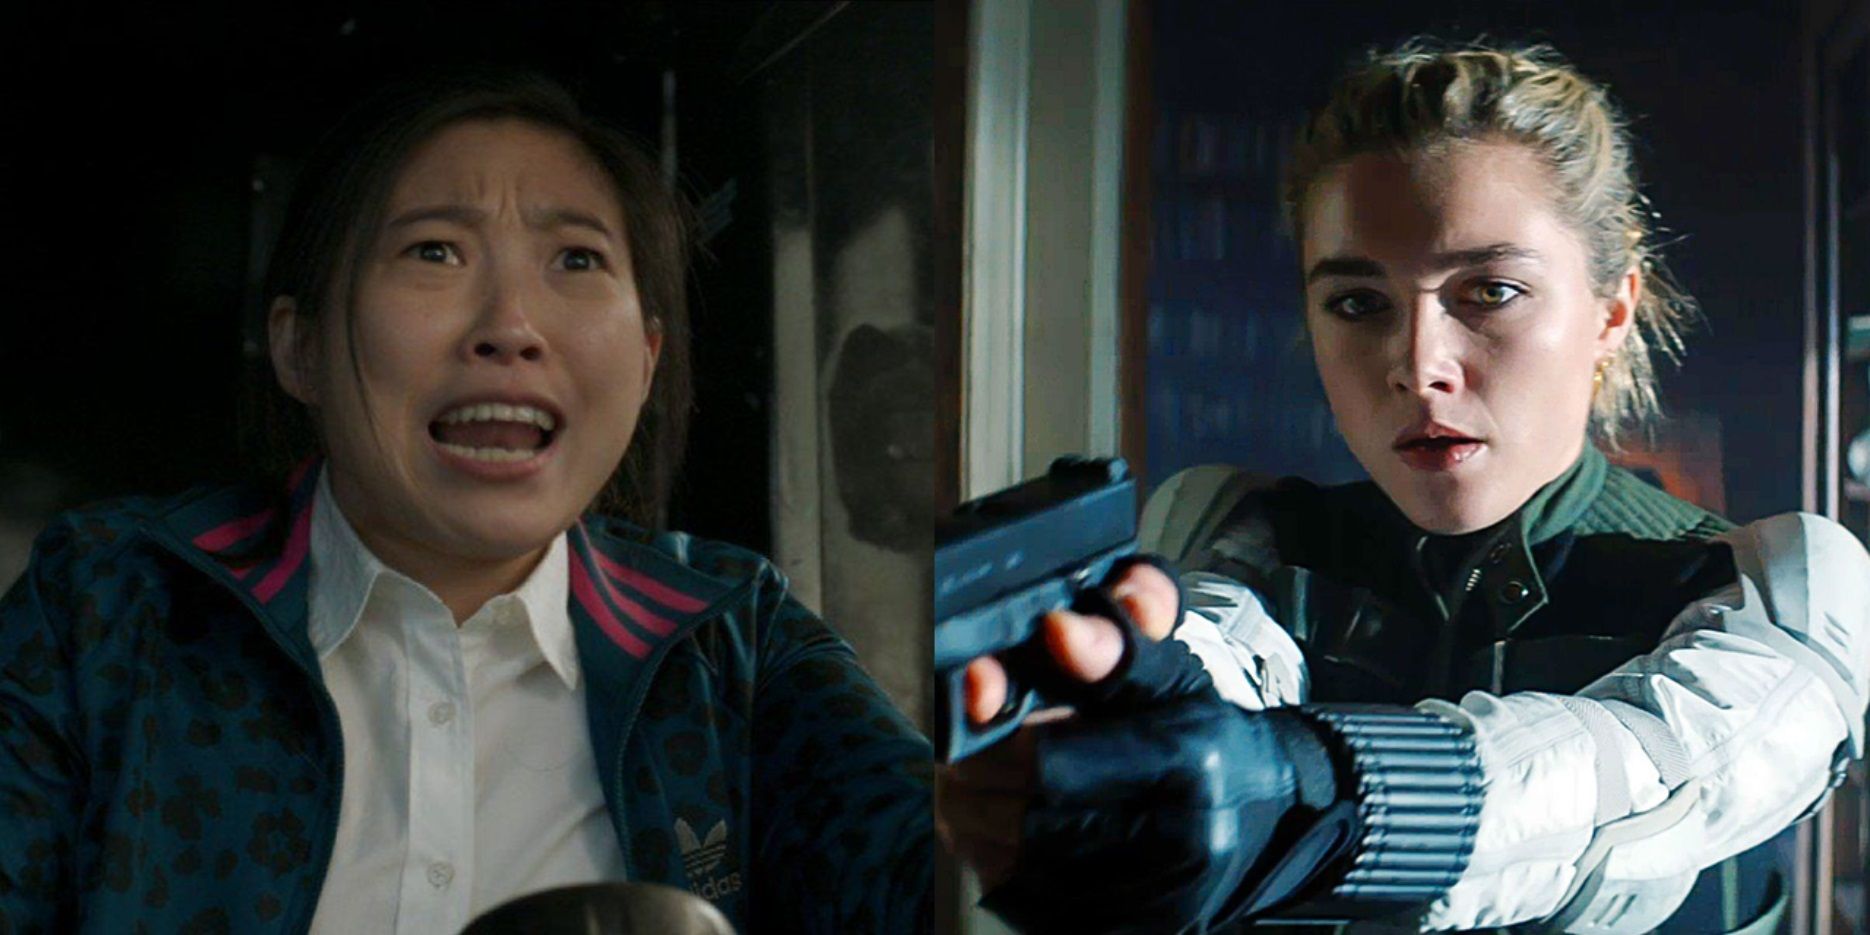 Split image of Katy in Shang-Chi and Yelena in Black Widow